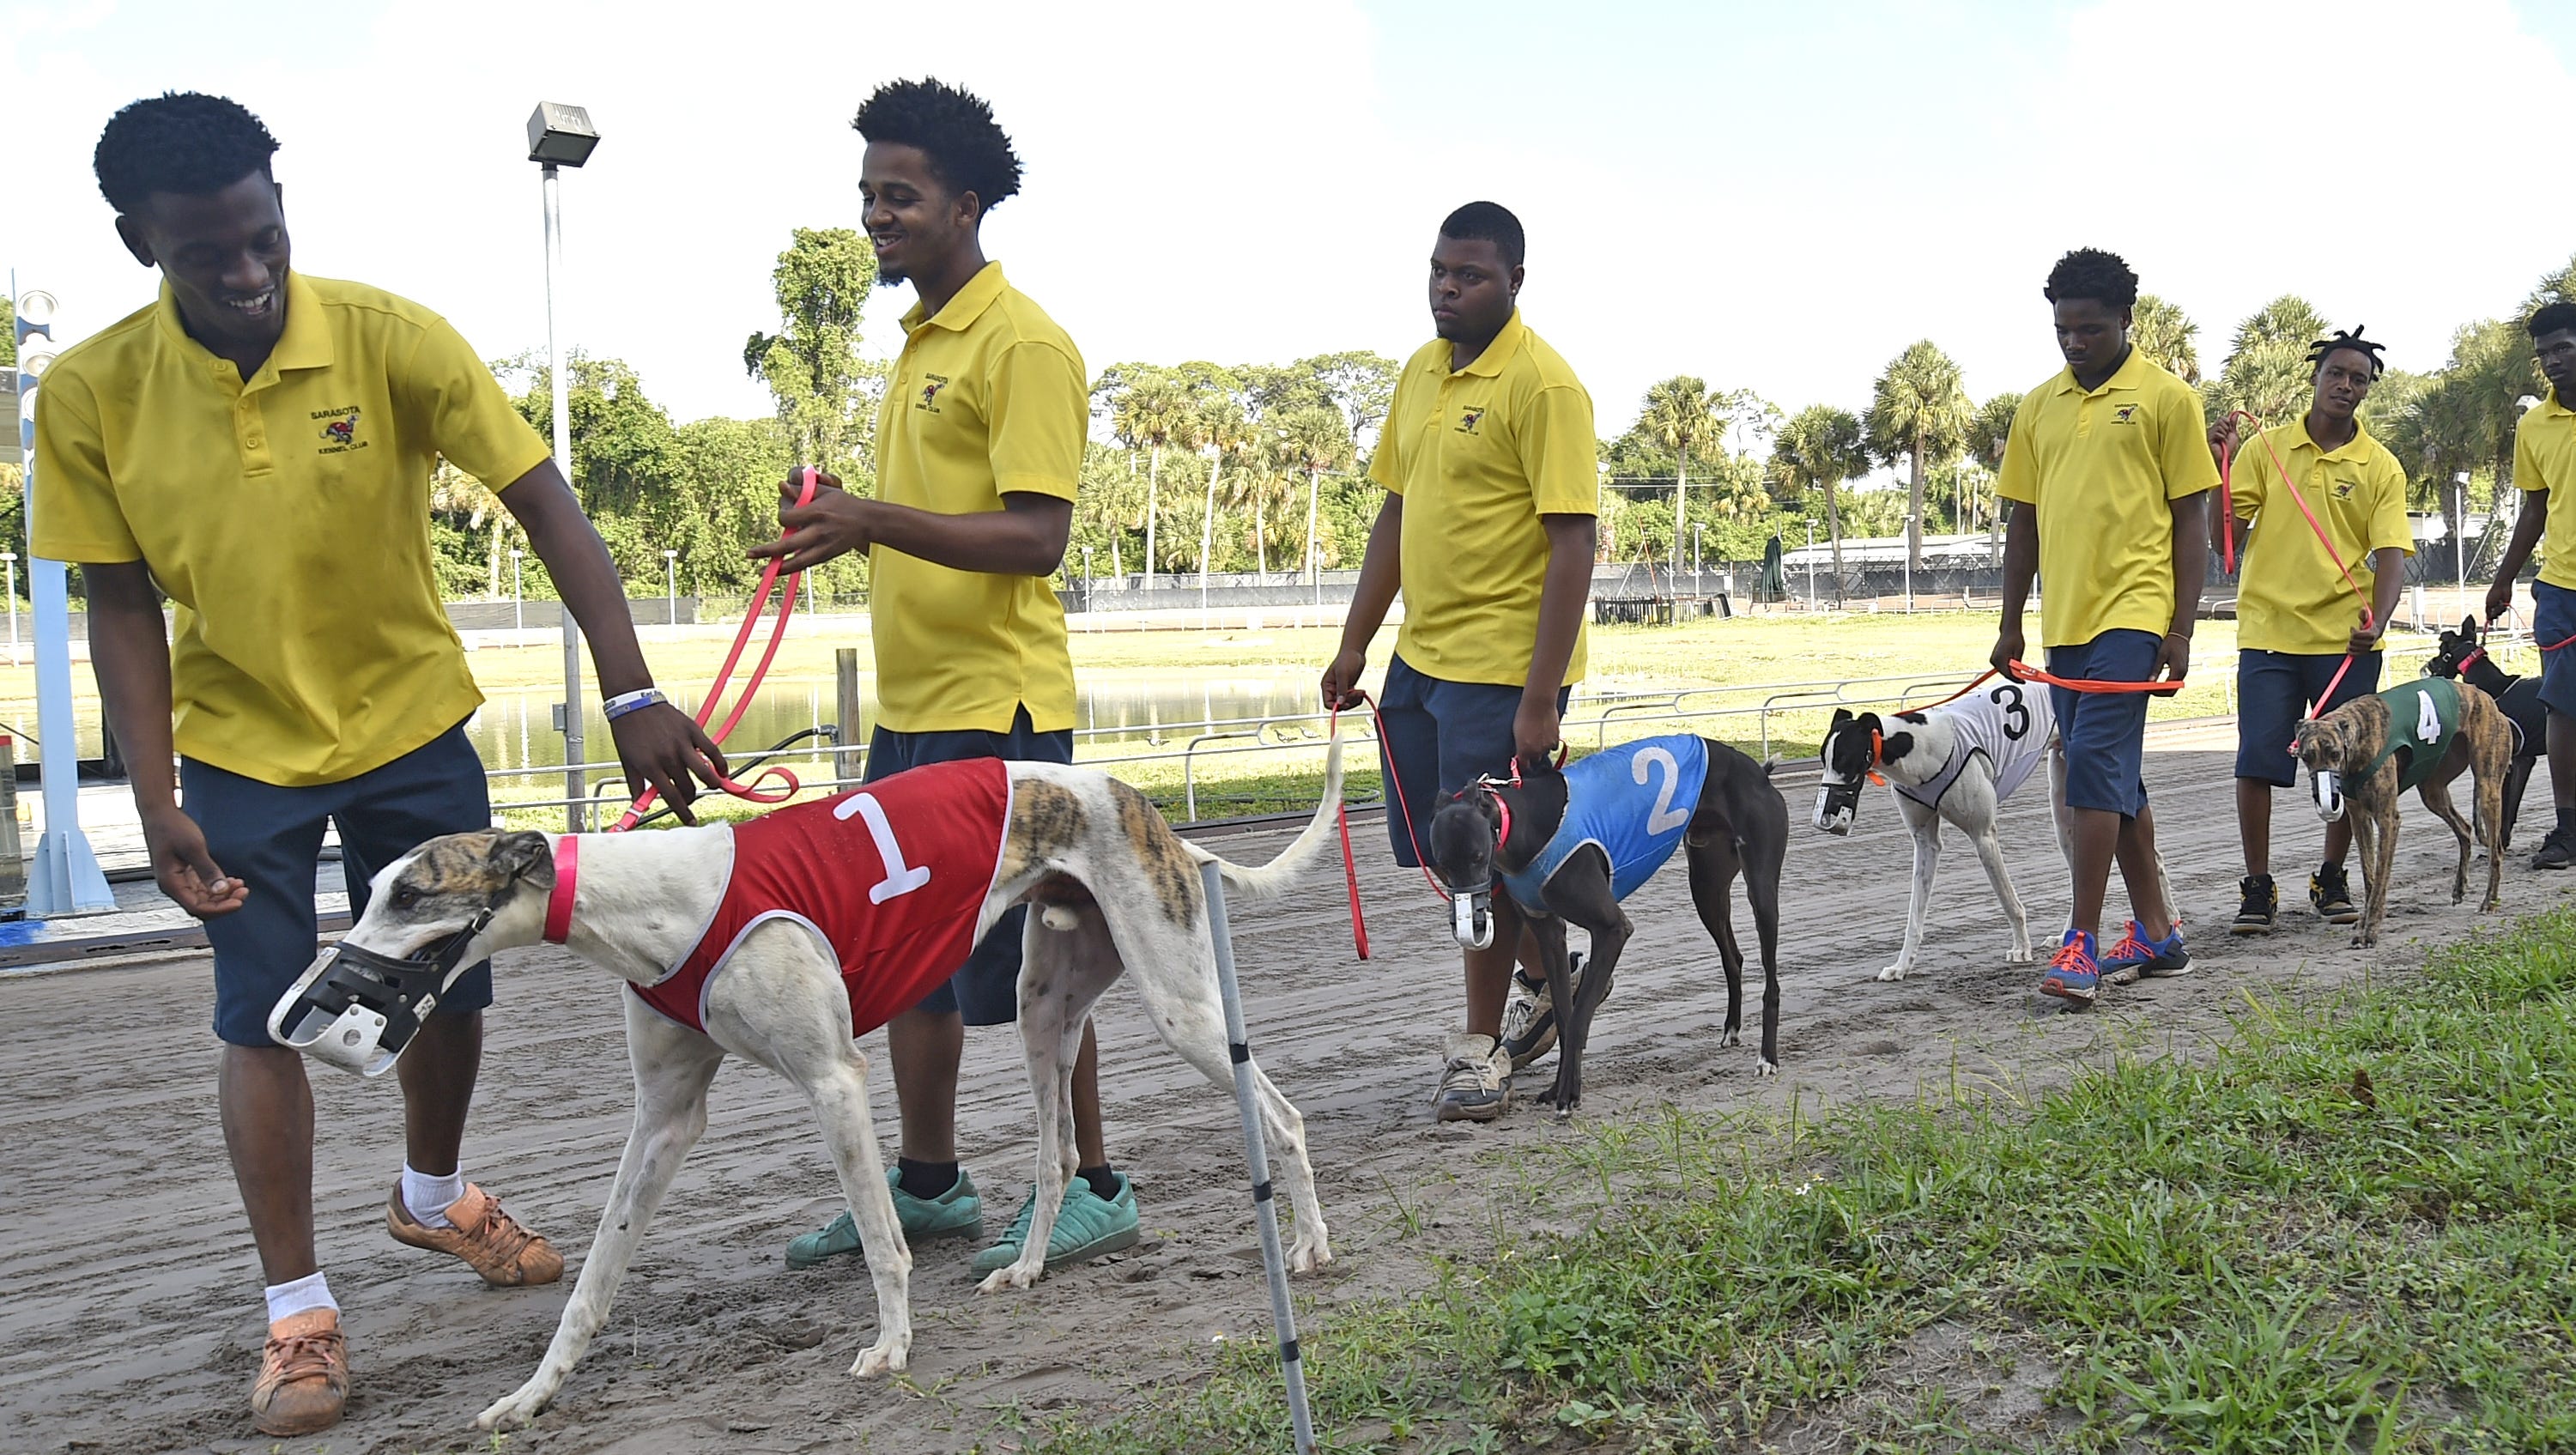 After 90 years, greyhound racing comes to an end in Sarasota